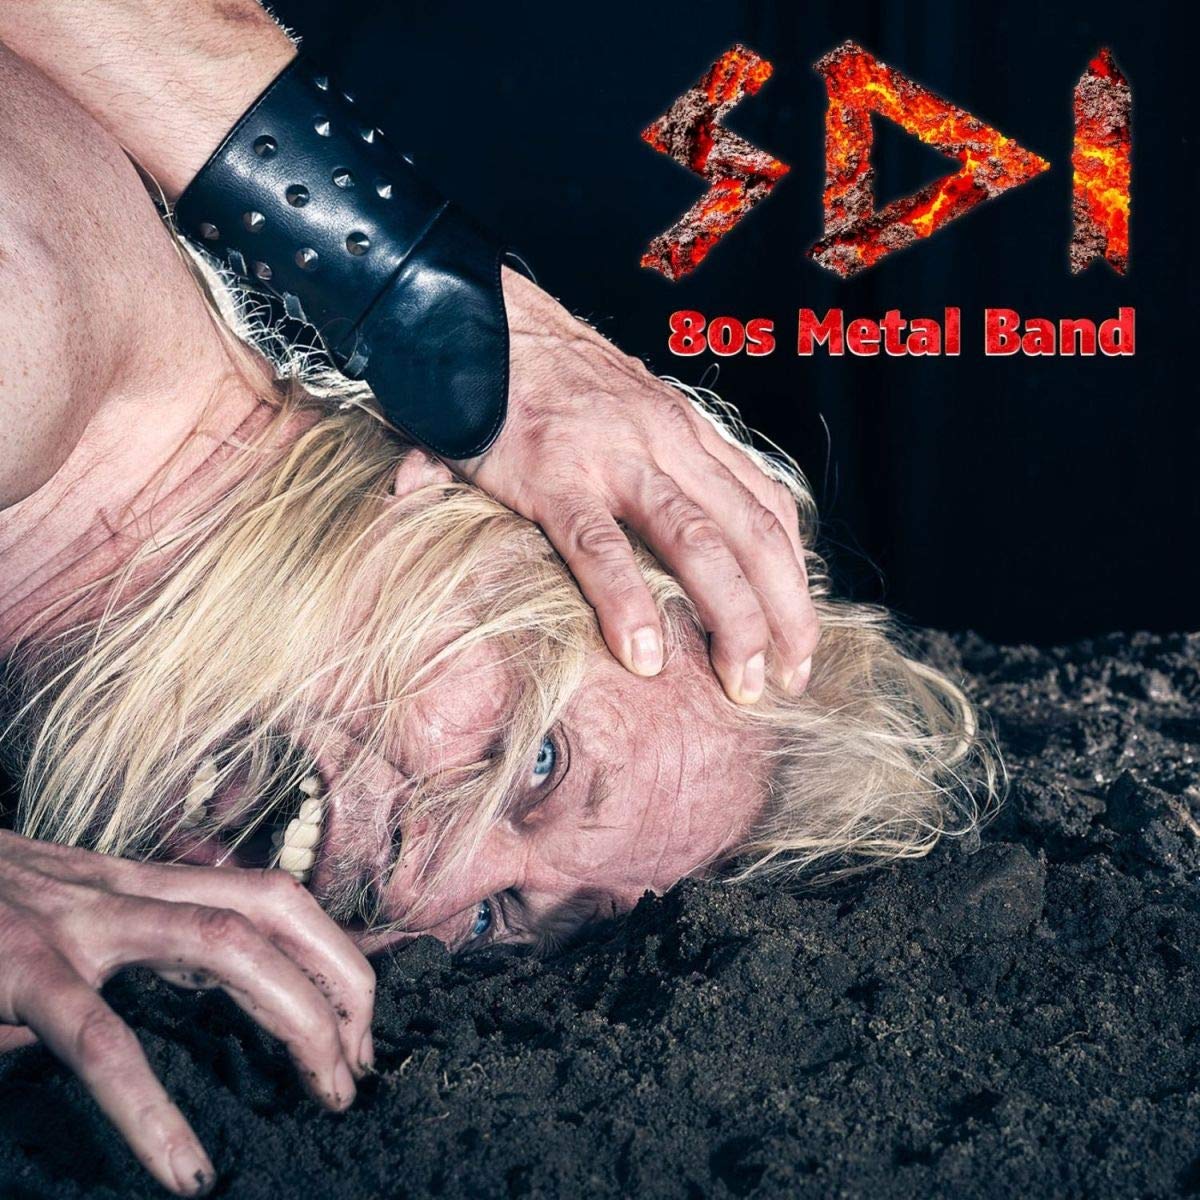 S.D.I – 80S METAL BAND